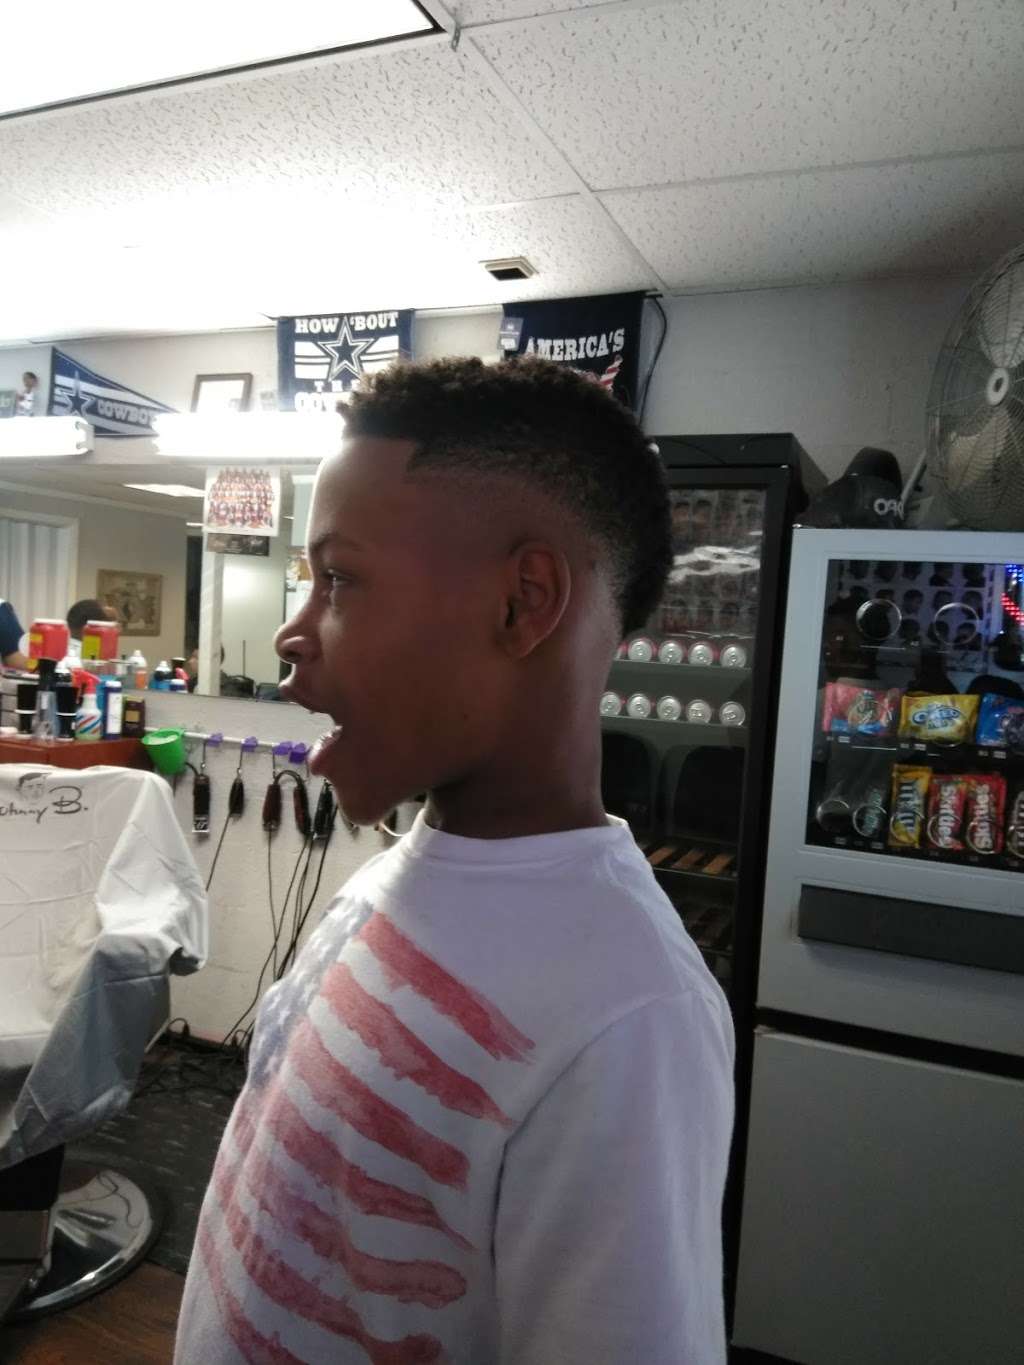 Gs Barber Shop | Photo 2 of 10 | Address: 5220 Gus Thomasson Rd, Mesquite, TX 75150, USA | Phone: (469) 767-3419